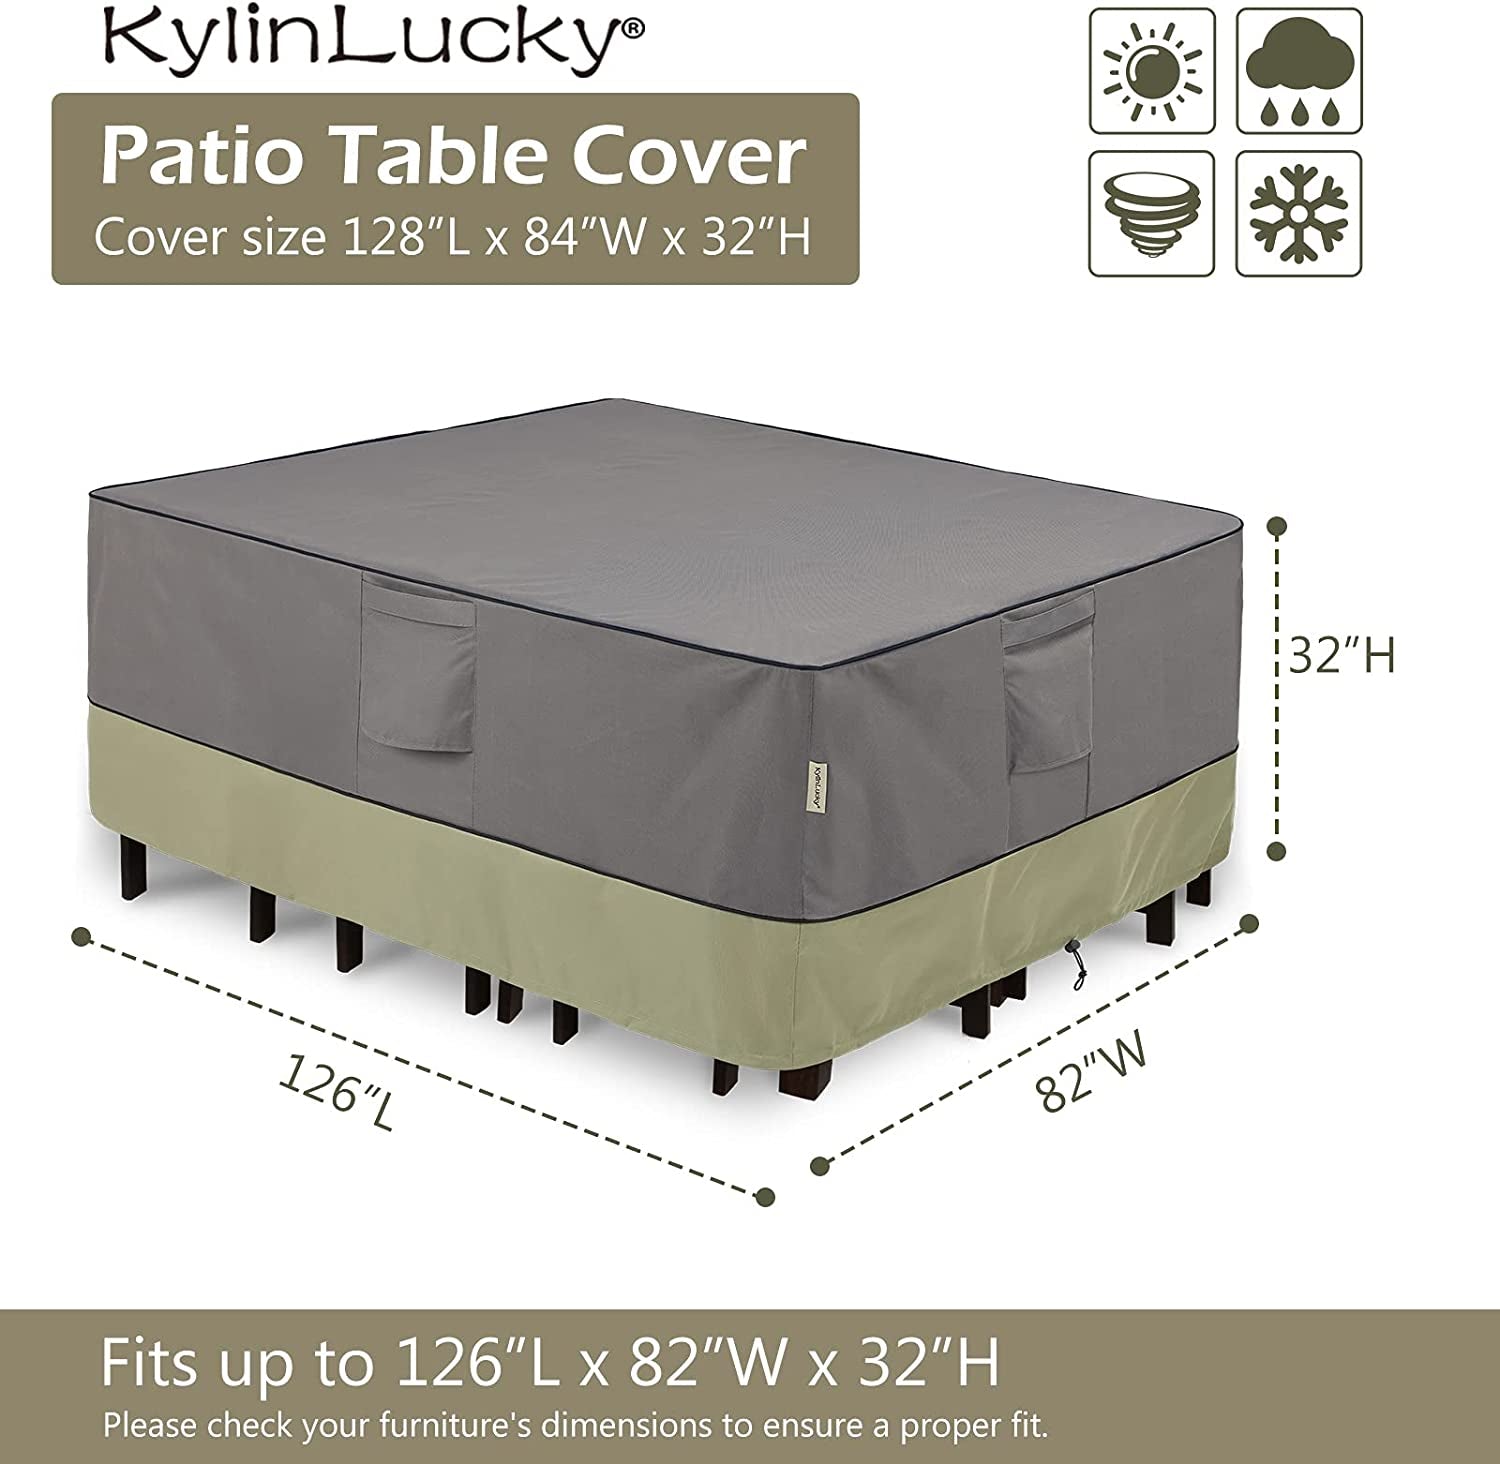 KylinLucky, Kylinlucky Patio Furniture Set Cover Outdoor Sectional Sofa Set Covers Outdoor Rectangulartable and Chair Set Covers Water Resistant Large, Fits up to 128 X 84 X 32 Inches (L X W X H)